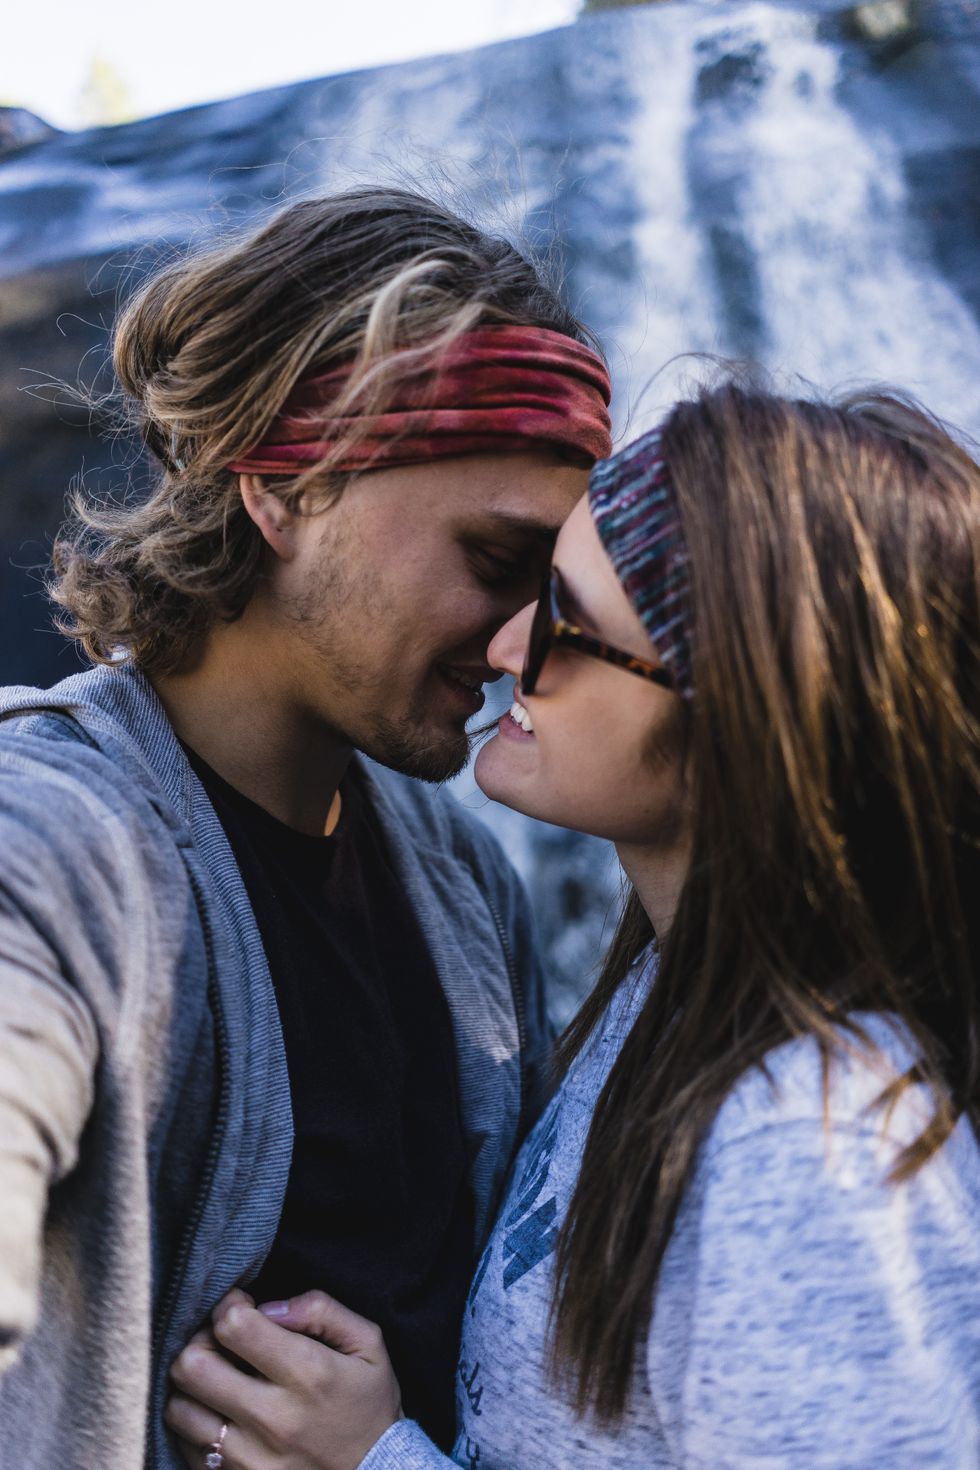 10 Signs Your Hookup Might Actually Become A Relationship